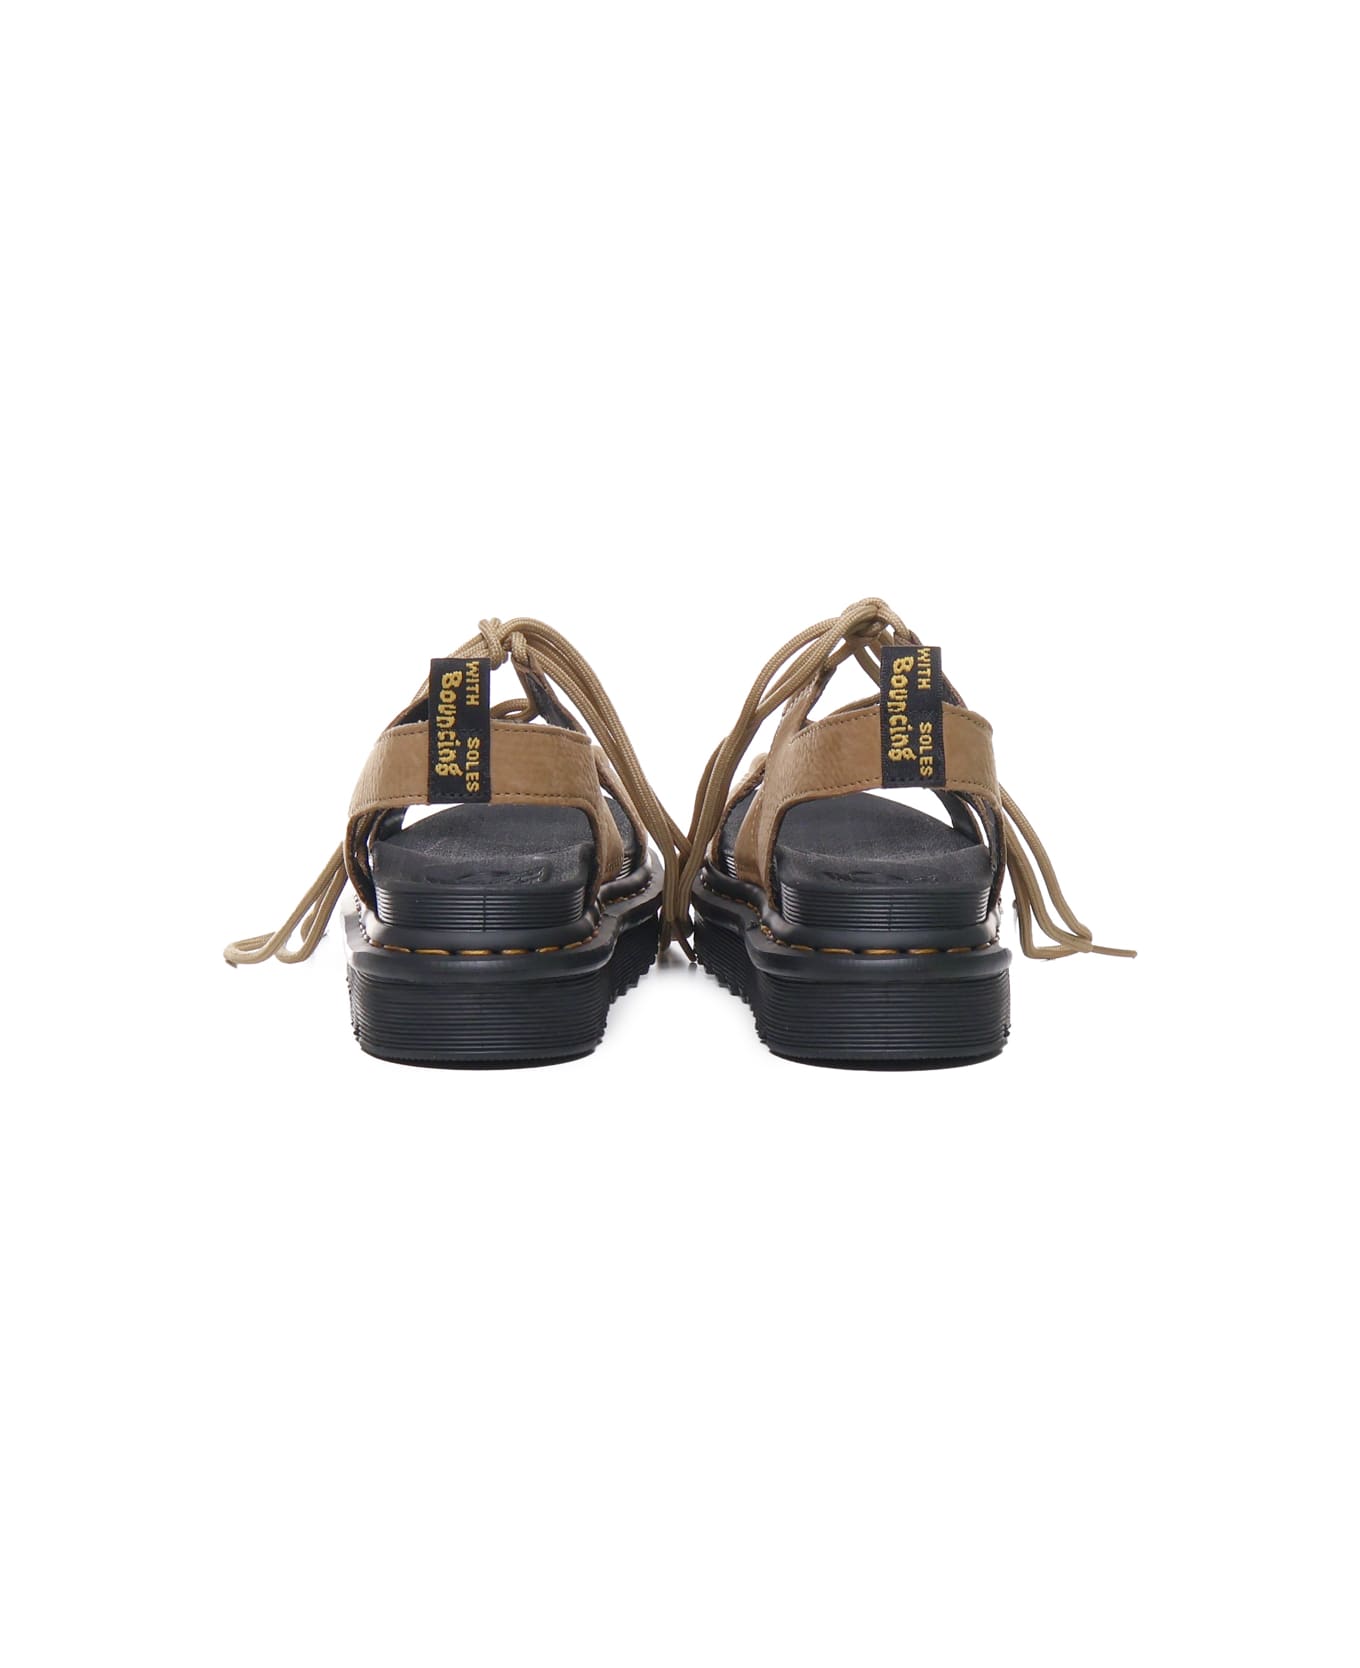 Dr. Martens Nartilla Sandals In Tumbled Leather - Tan